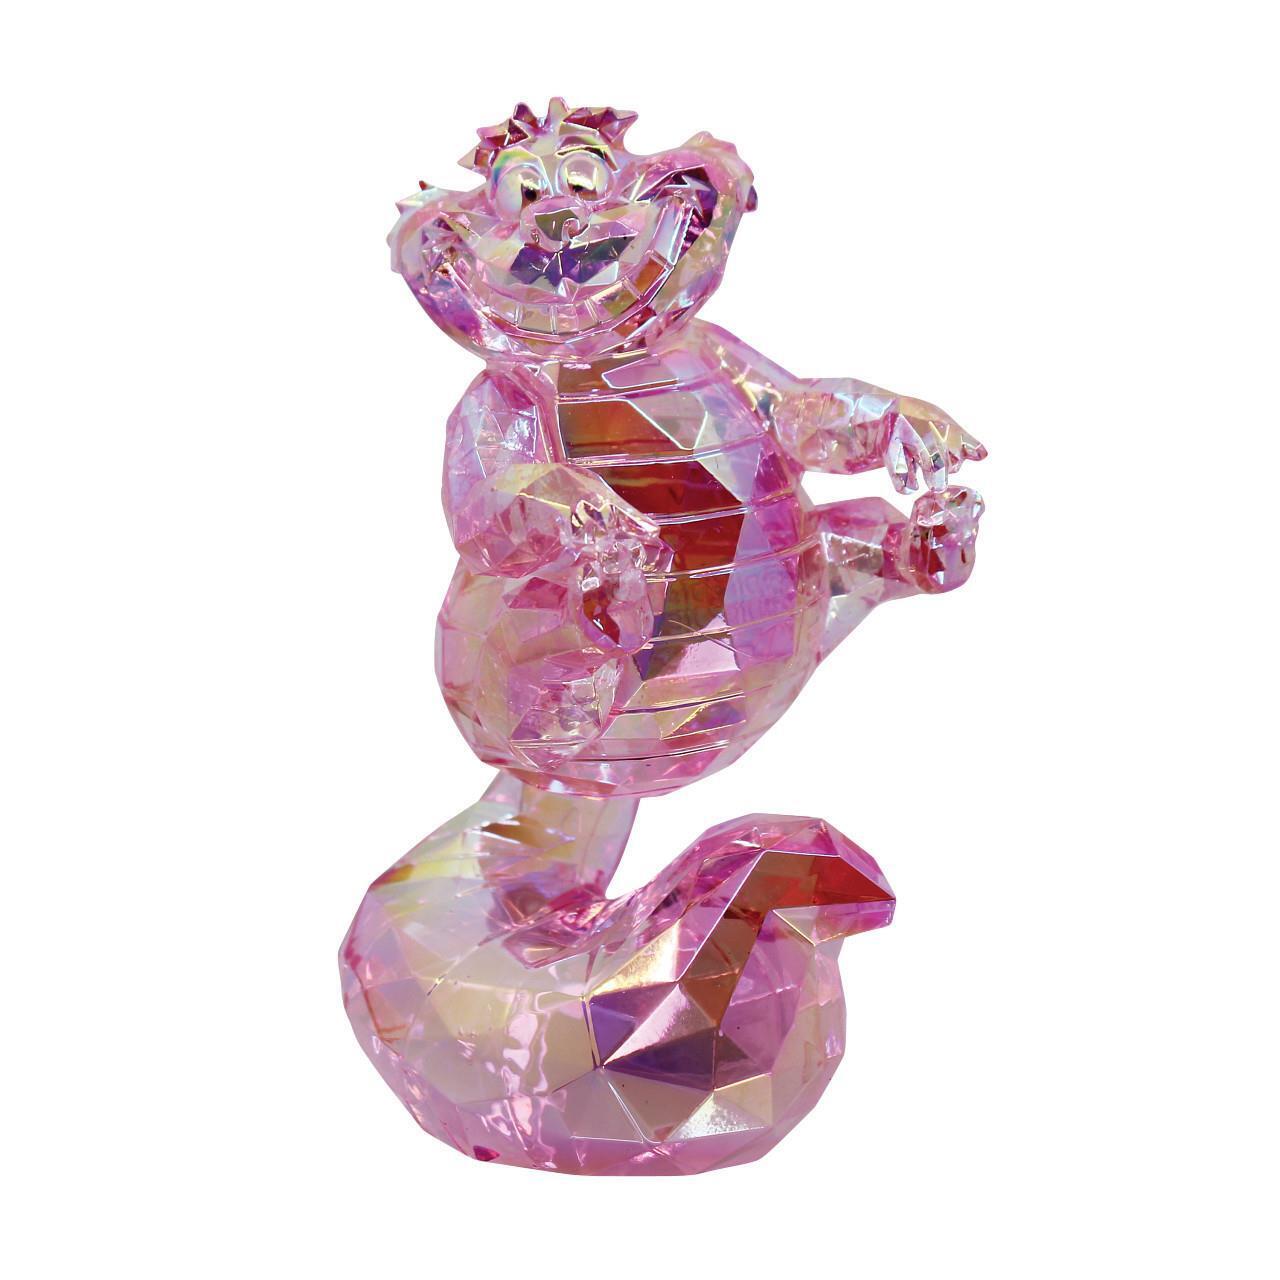 Facets Collection Cheshire Cat Acrylic Figurine 6015337